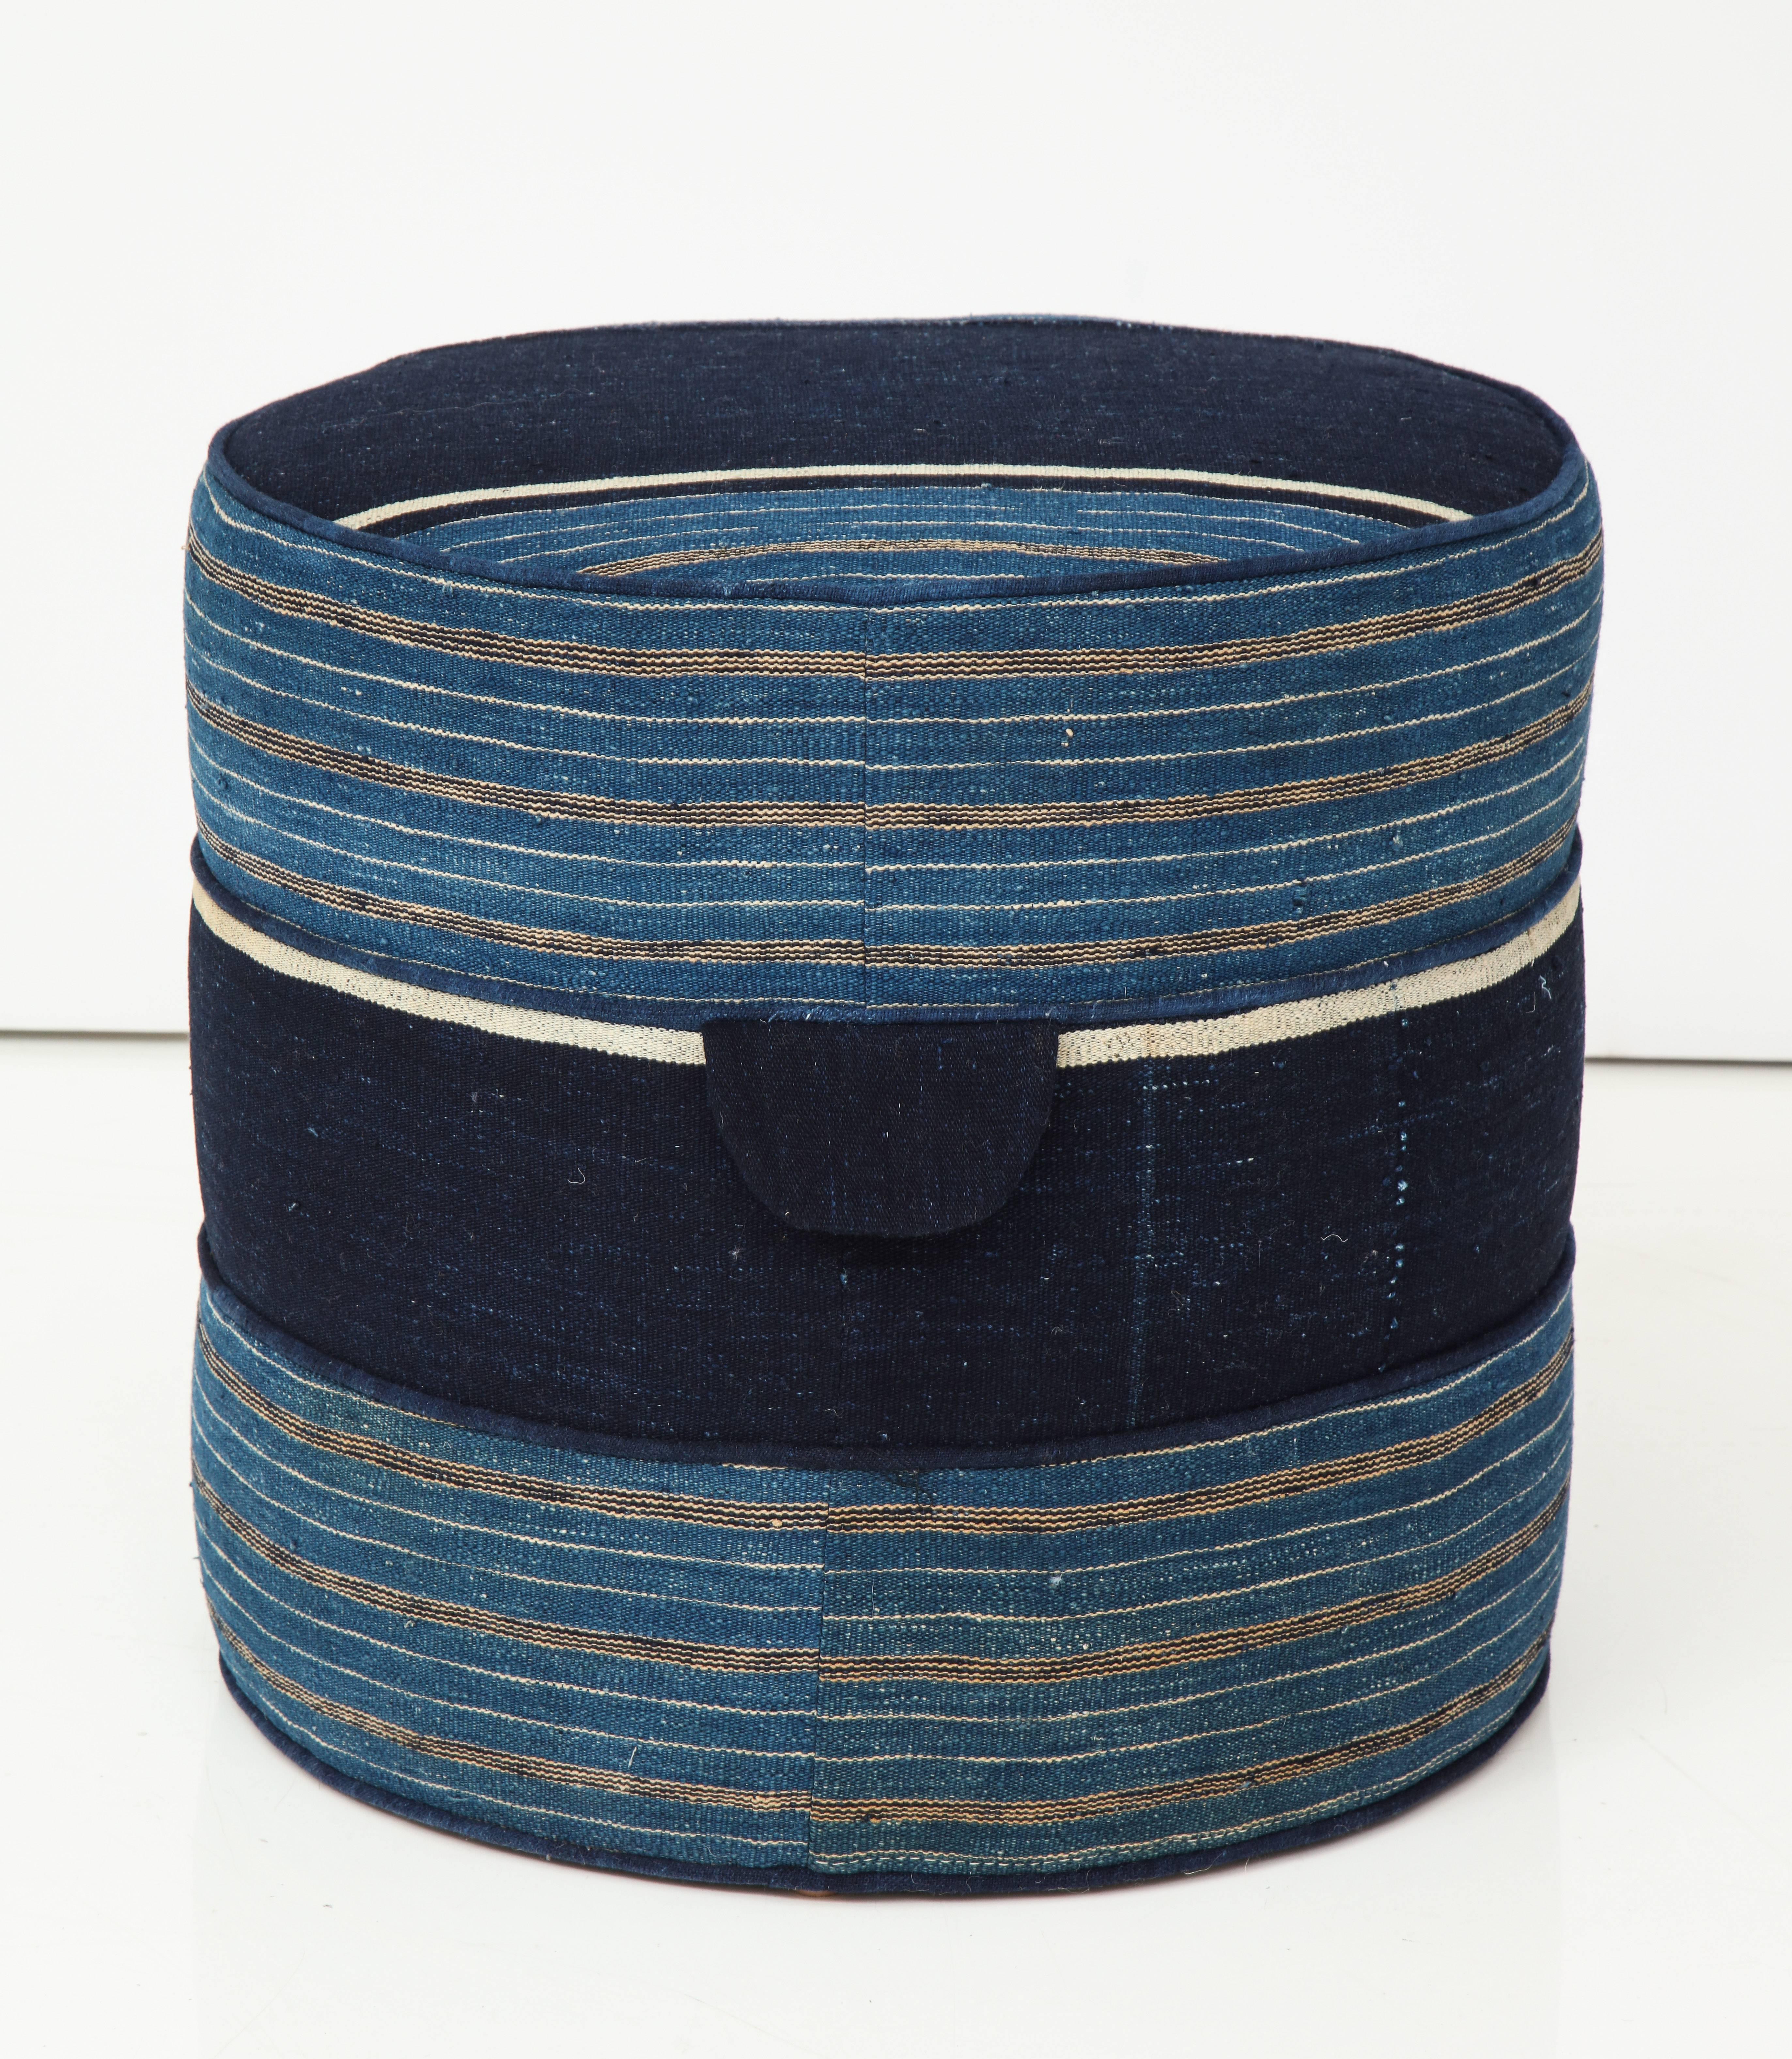 Contemporary NK Collection Small Round Hassock Upholstered in Indigo African Fabric